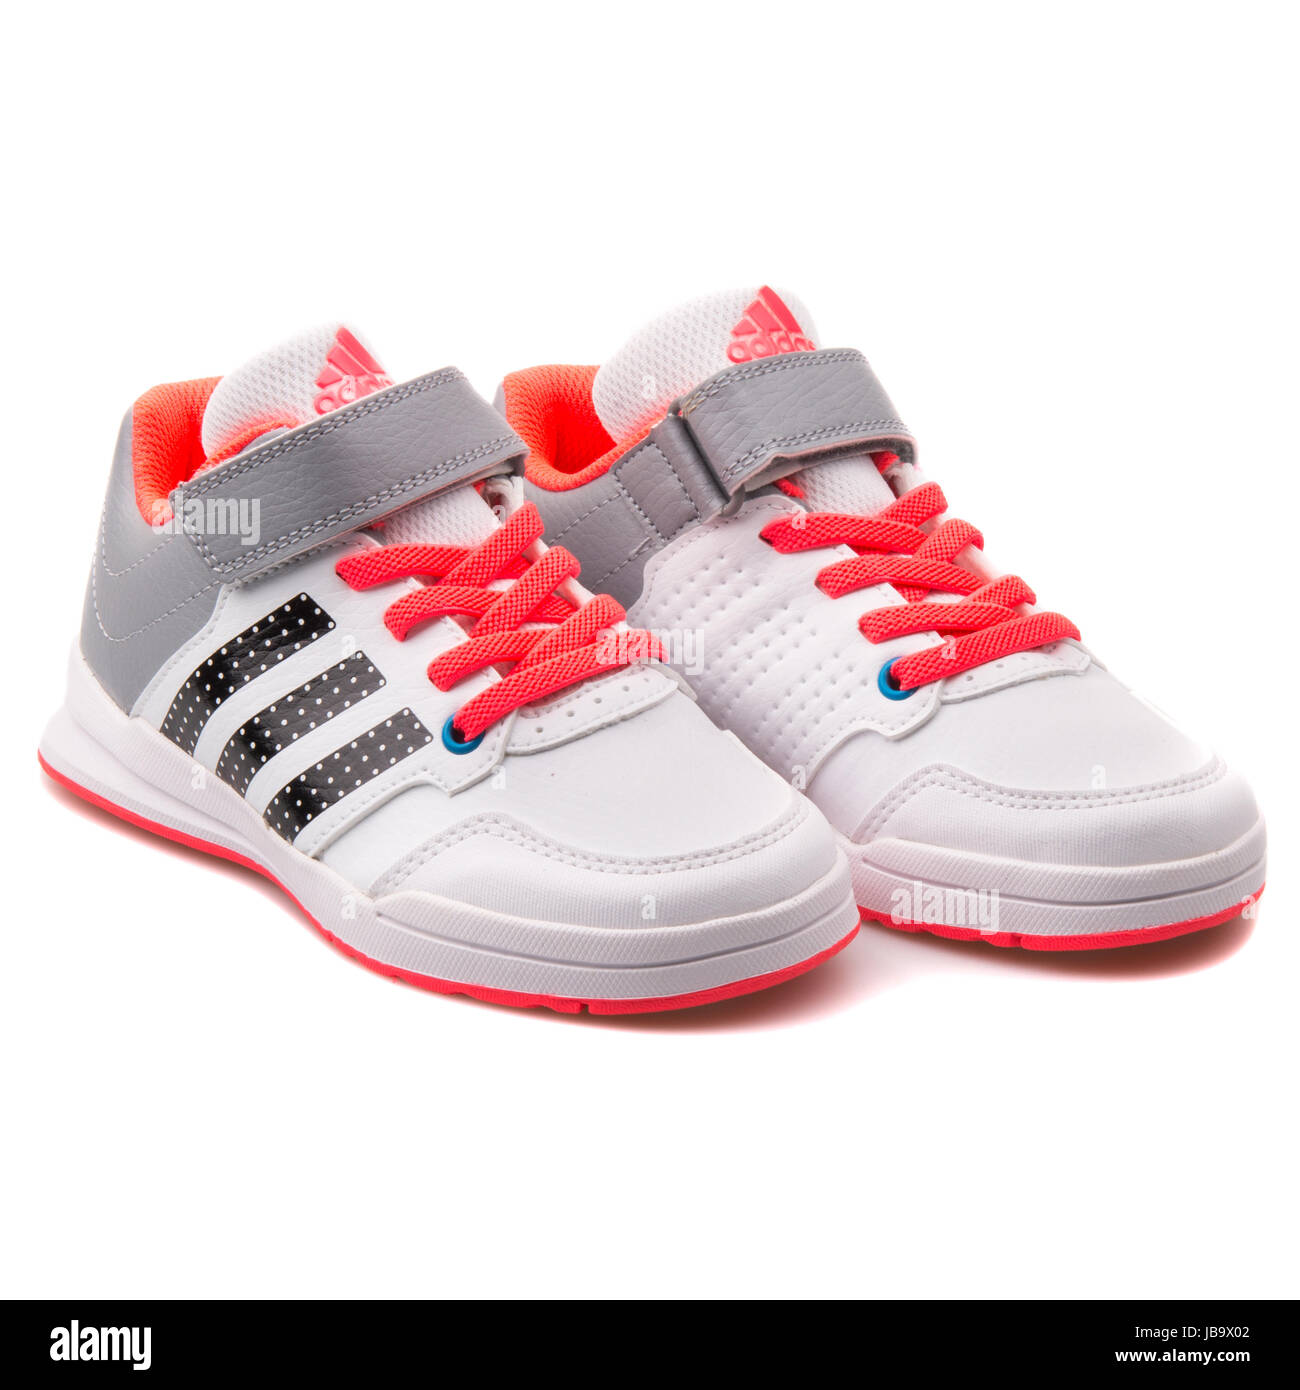 Adidas Jan BS 2 C White and Grey Kids Sports Sneakers - B23903 Stock Photo  - Alamy